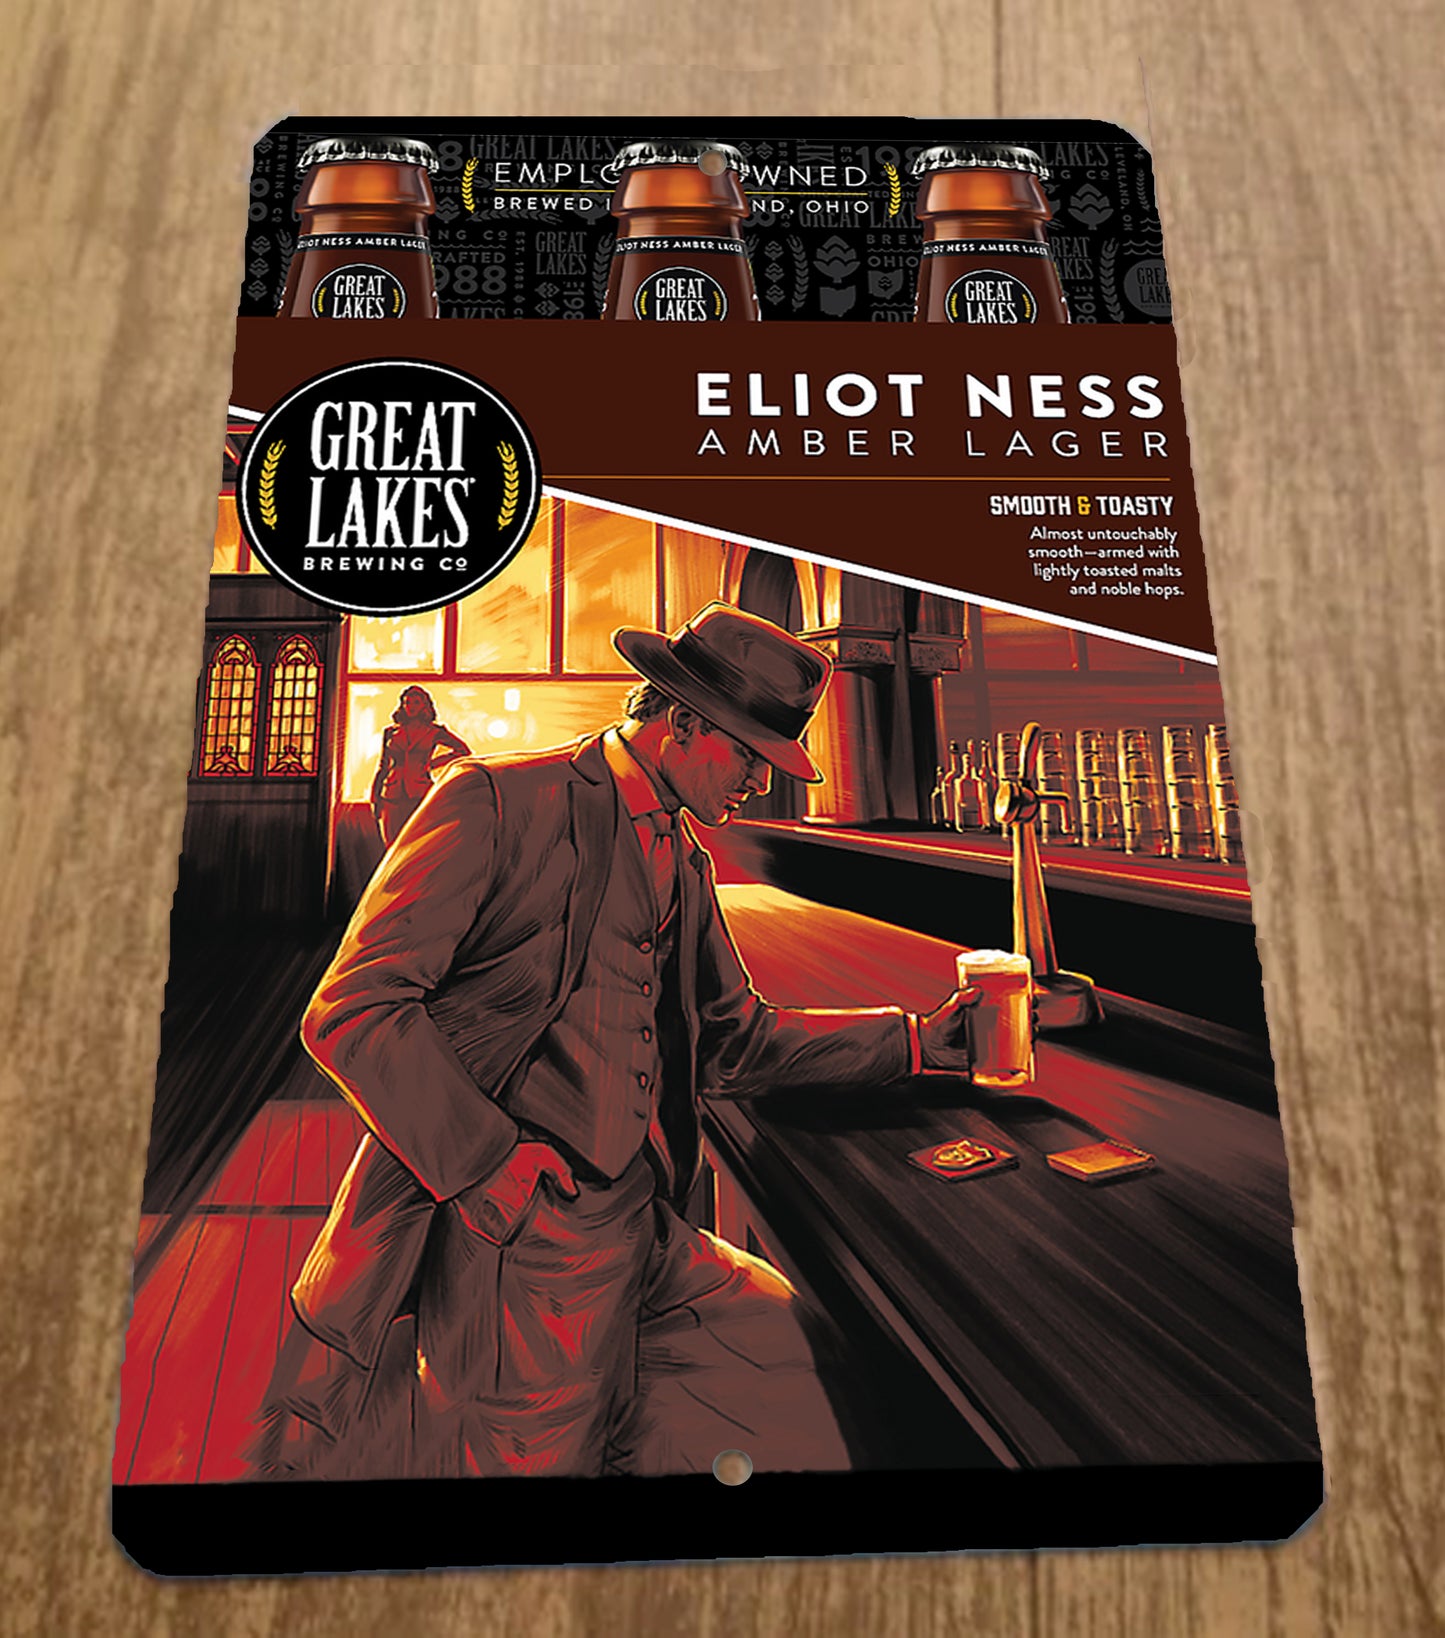 Eliot Ness Amber Lager Beer Great Lakes Brewing 8x12 Metal Wall Bar Sign